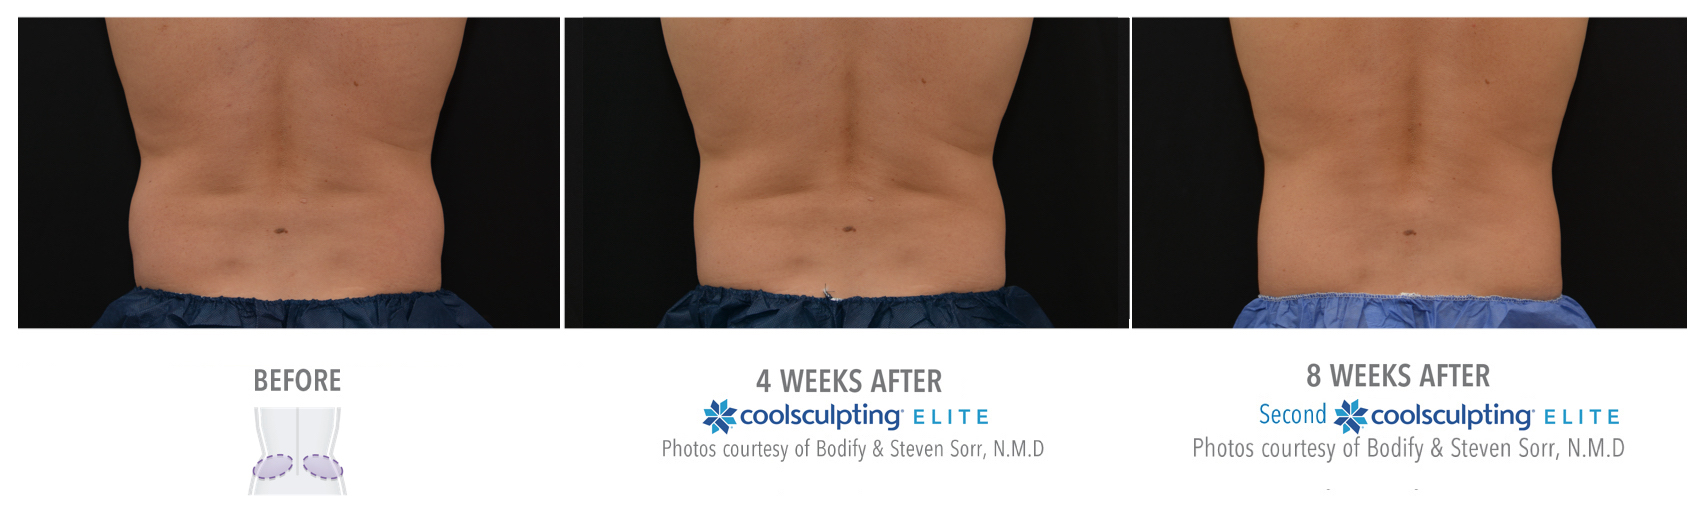 Coolsculpting Treatment Results on a Male Love Handles | Melindas Med-Spa & Salon in North Myrtle Beach SC